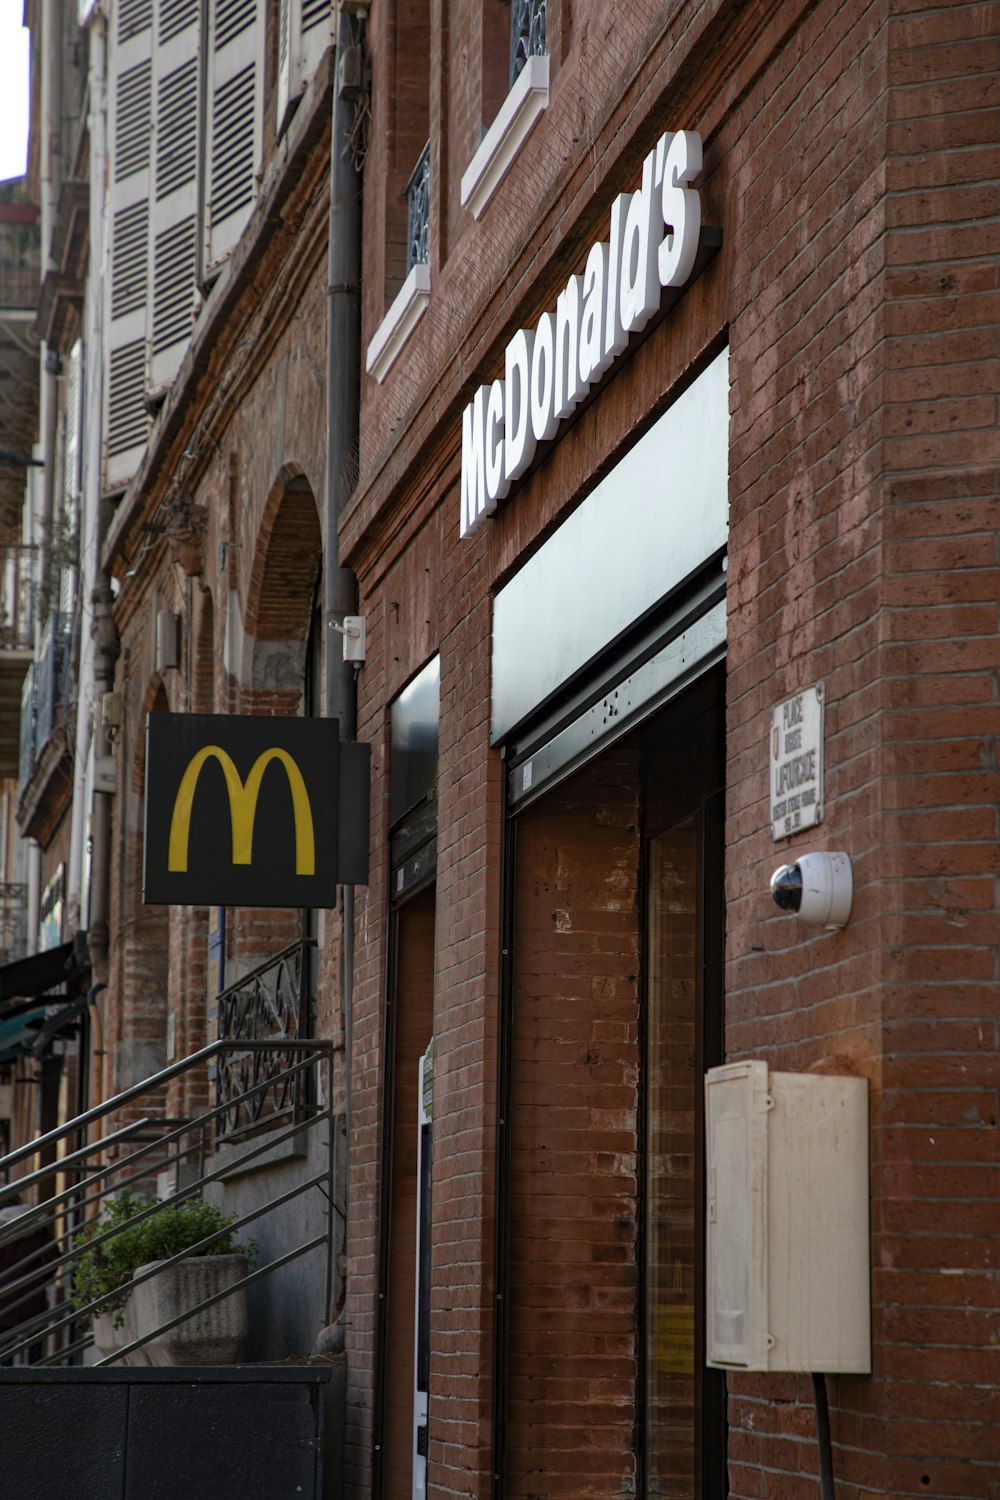 a mcdonald's sign on the side of a building